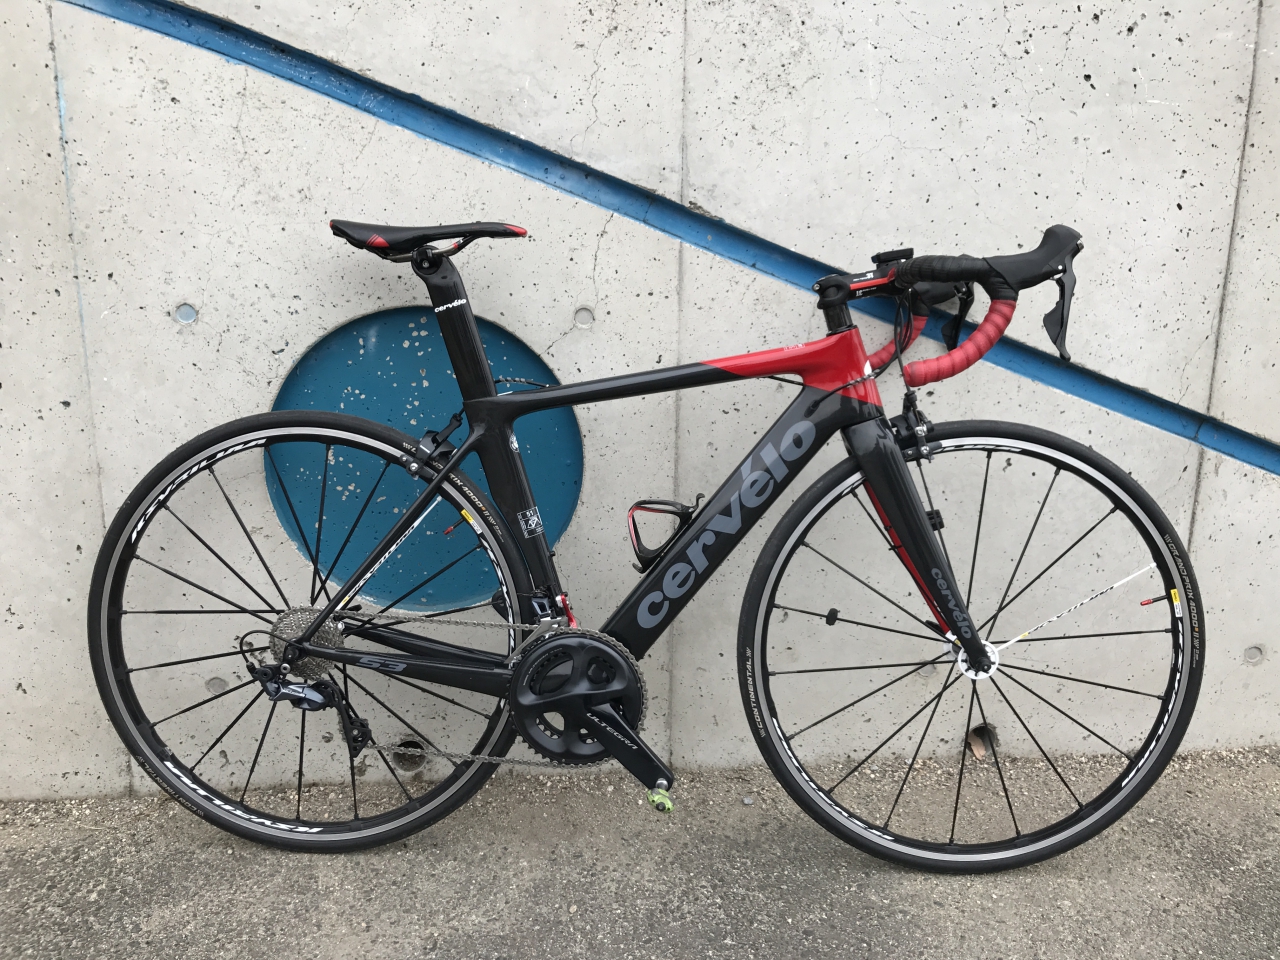 CERVELO S3に新型R8000アルテグラ取り付けしました。 - Climb cycle sports